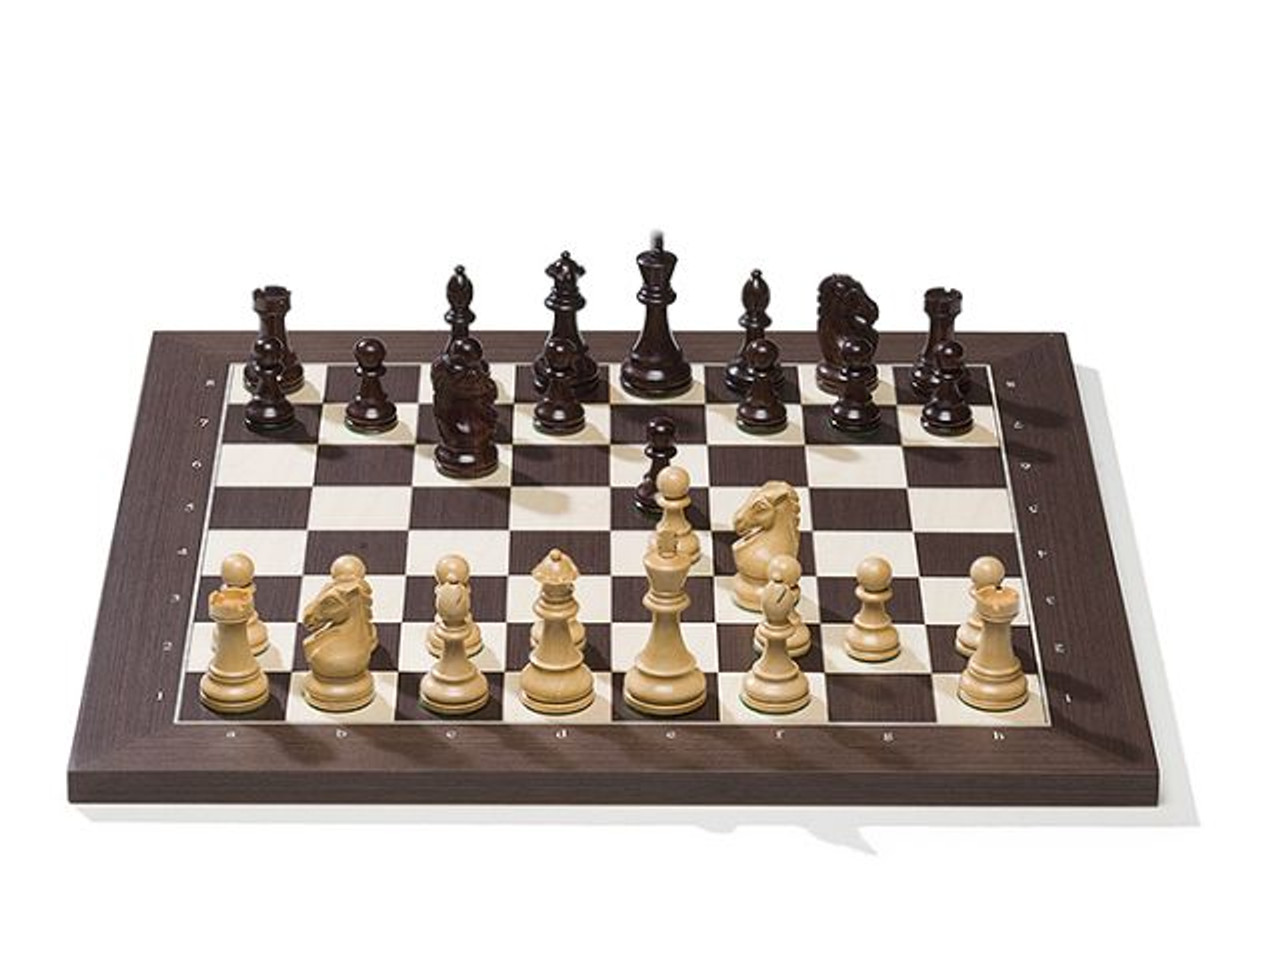 Electronic Chess Board - DGT Wenge  USB Chessboard (No Chess Pieces)